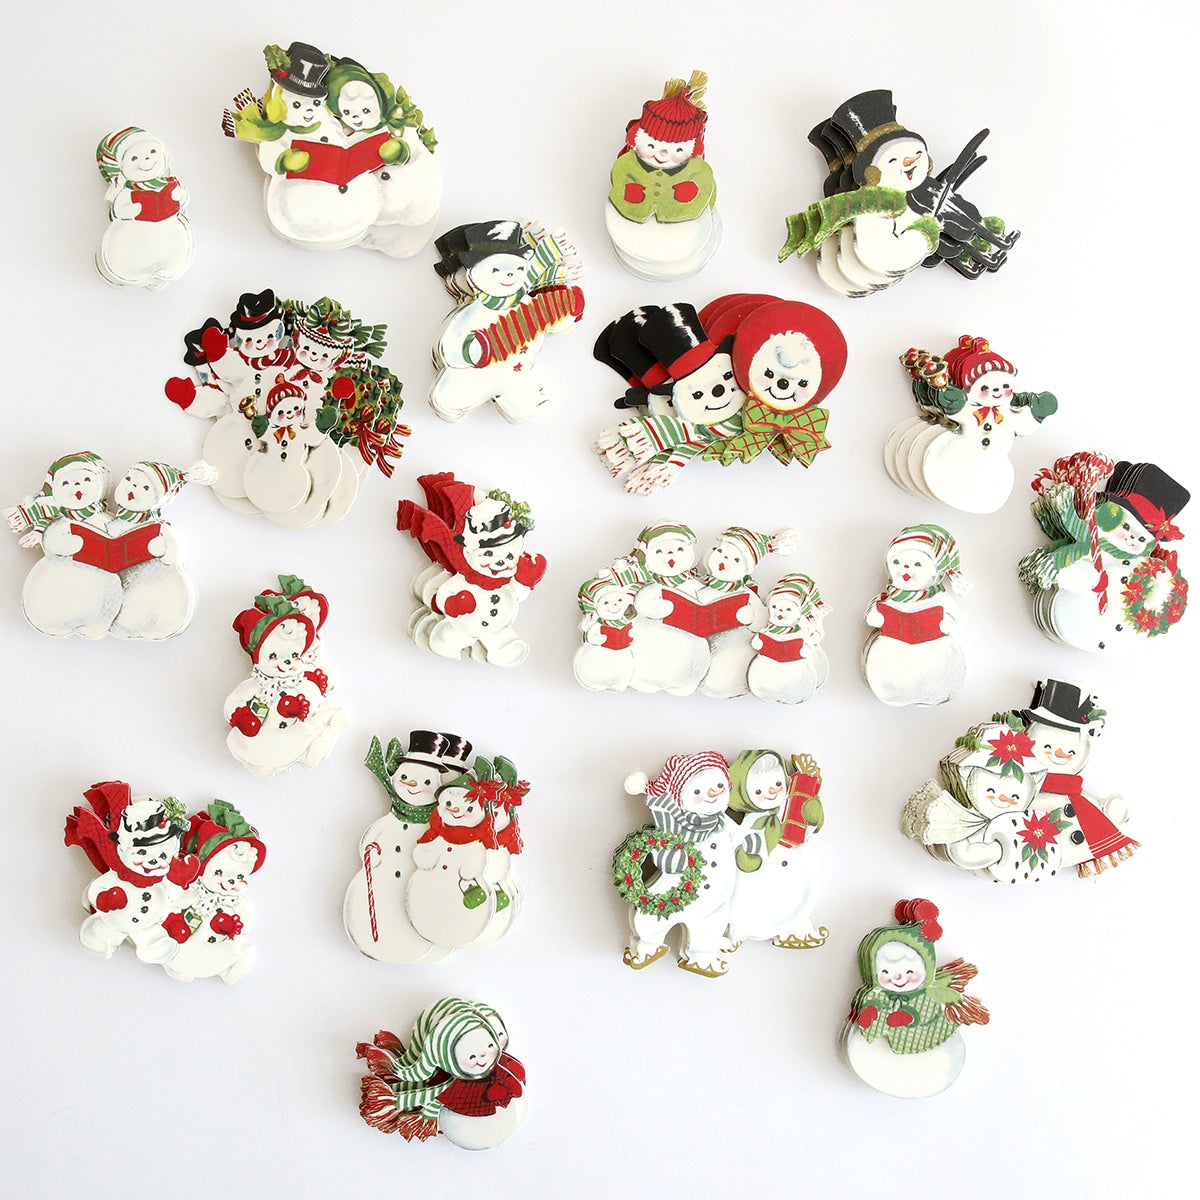 A group of Snow People Sticker Bundle and Christmas ornaments are arranged on a white surface.